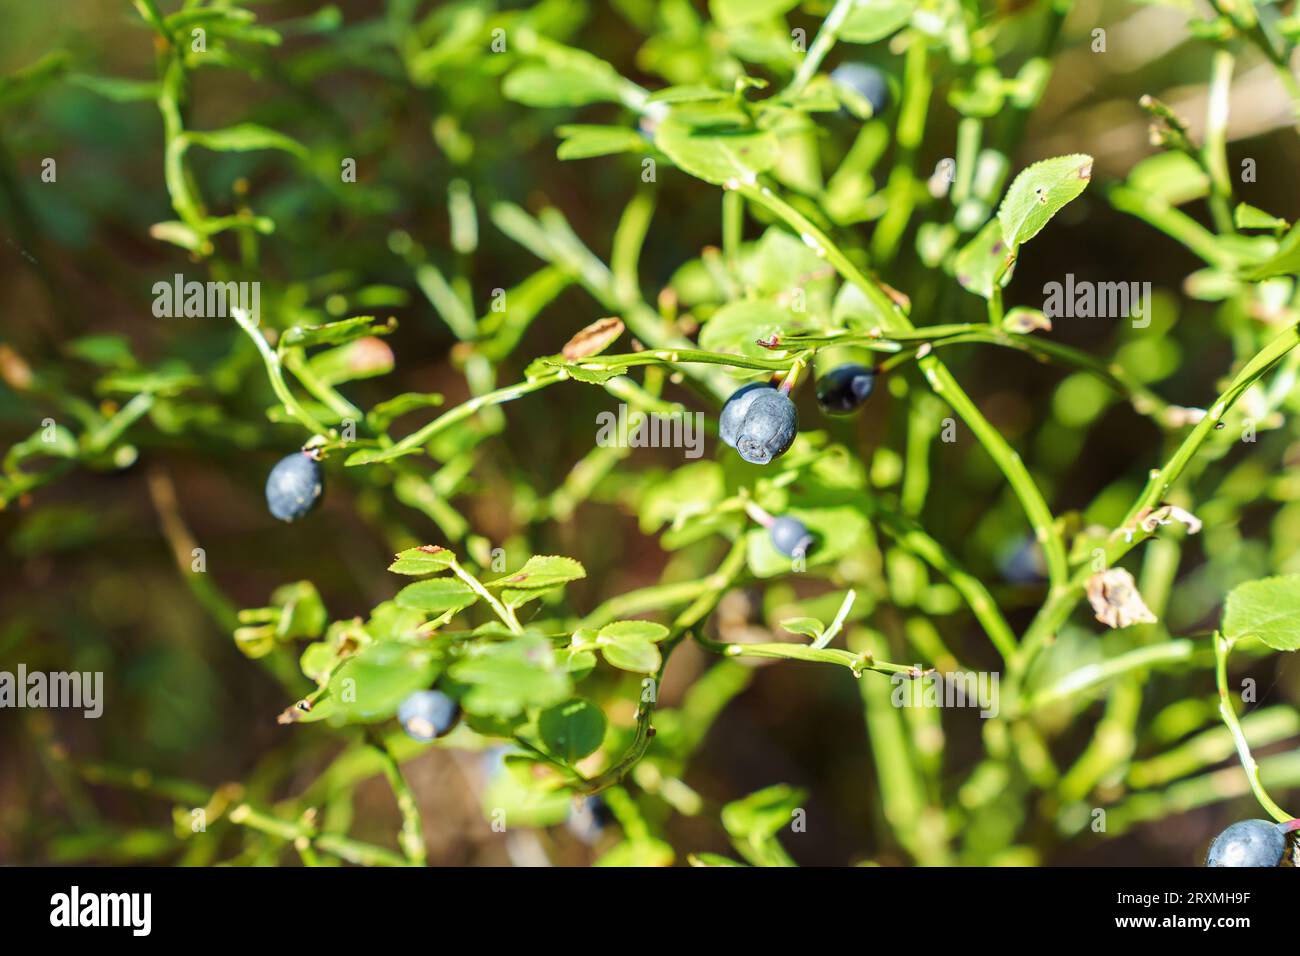 A bush with ripe berries of wild forest blueberries grows in the summer forest in sunlight Stock Photo